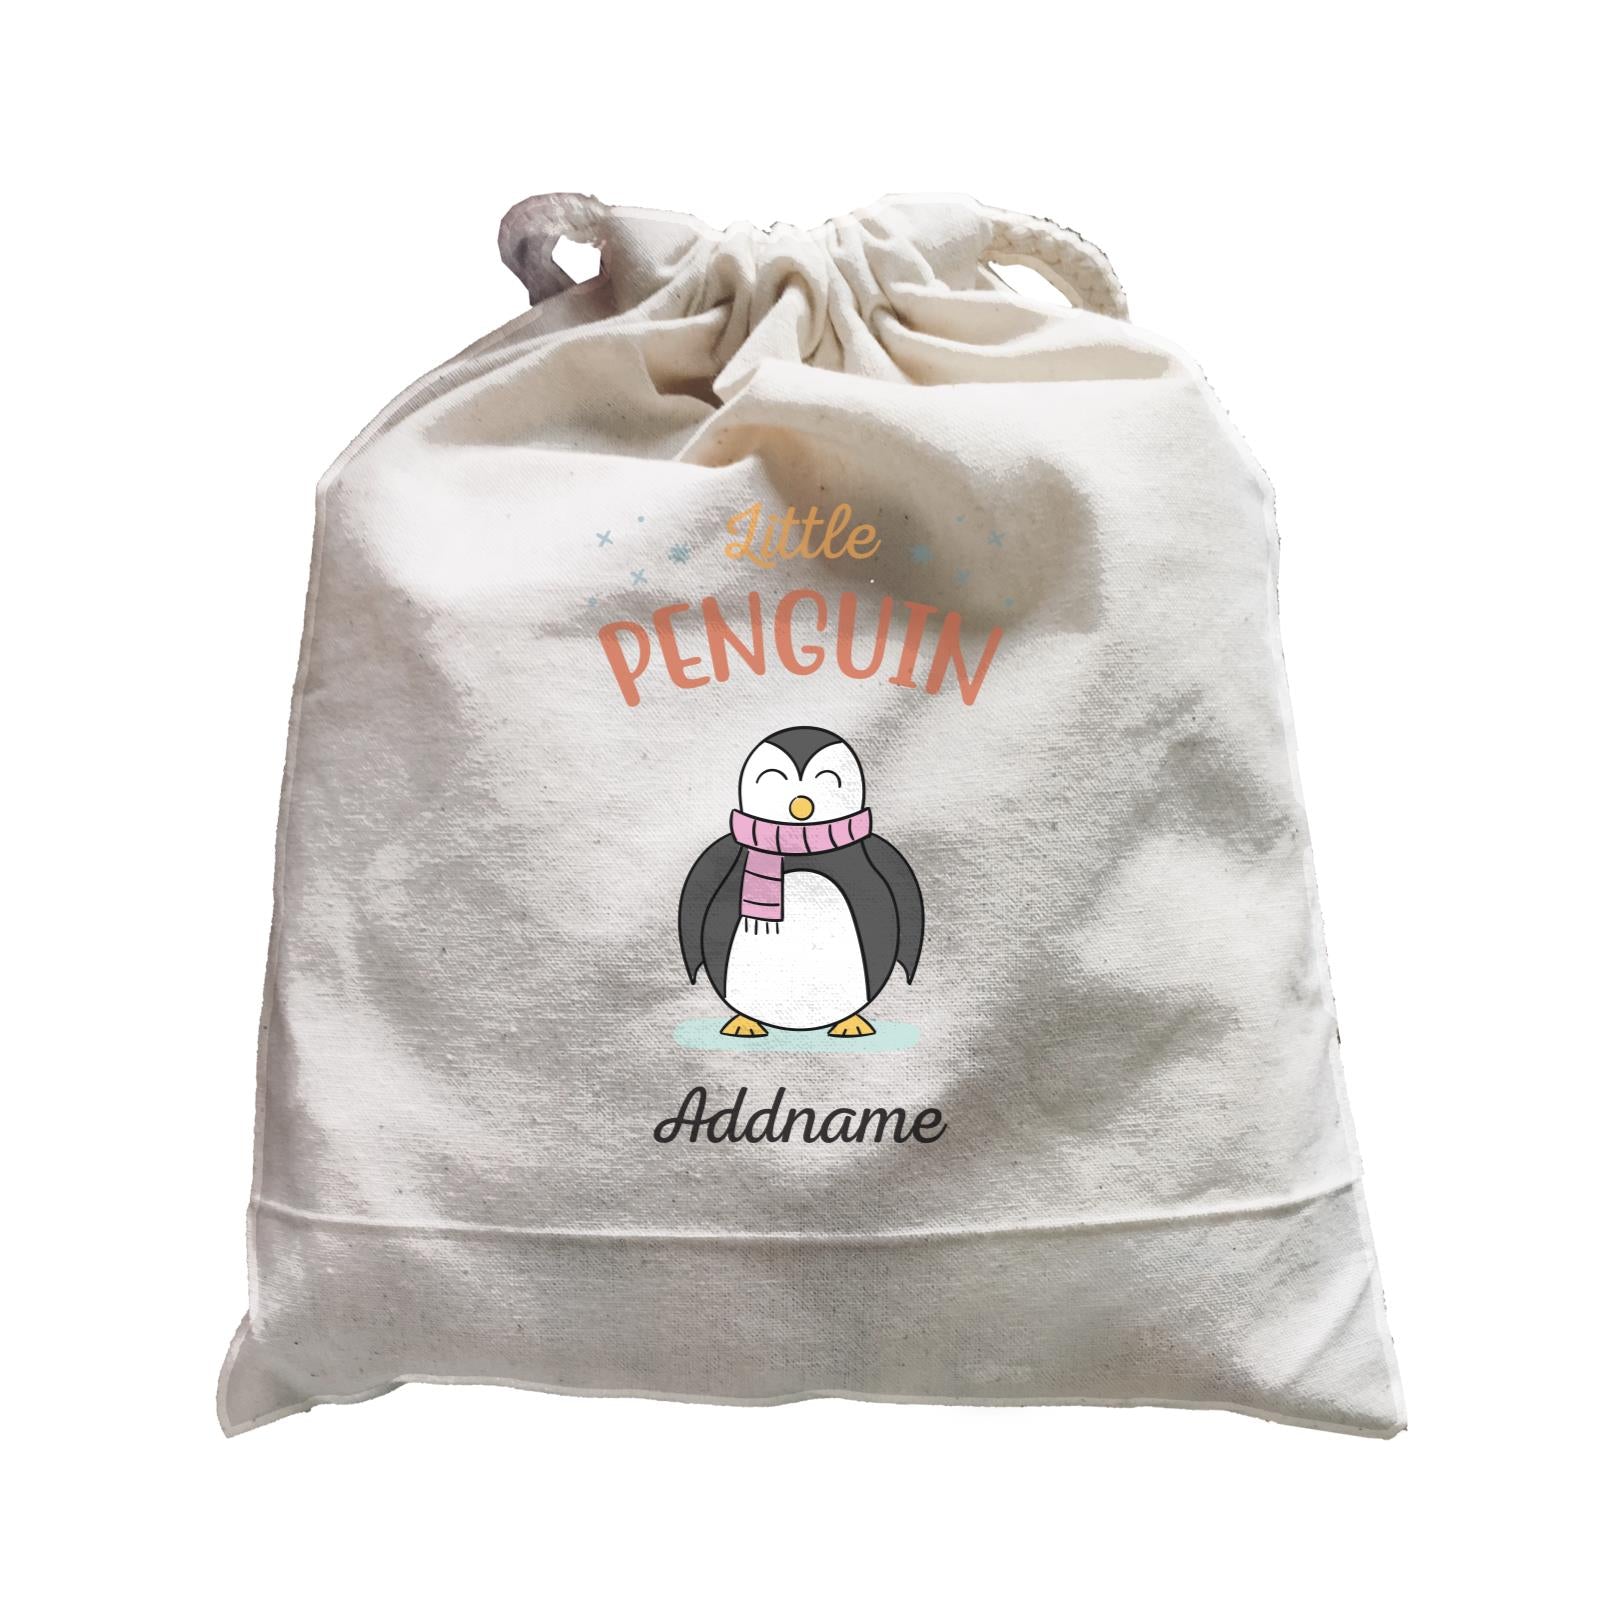 Penguin Family Little Penguin With Scarf Addname Satchel